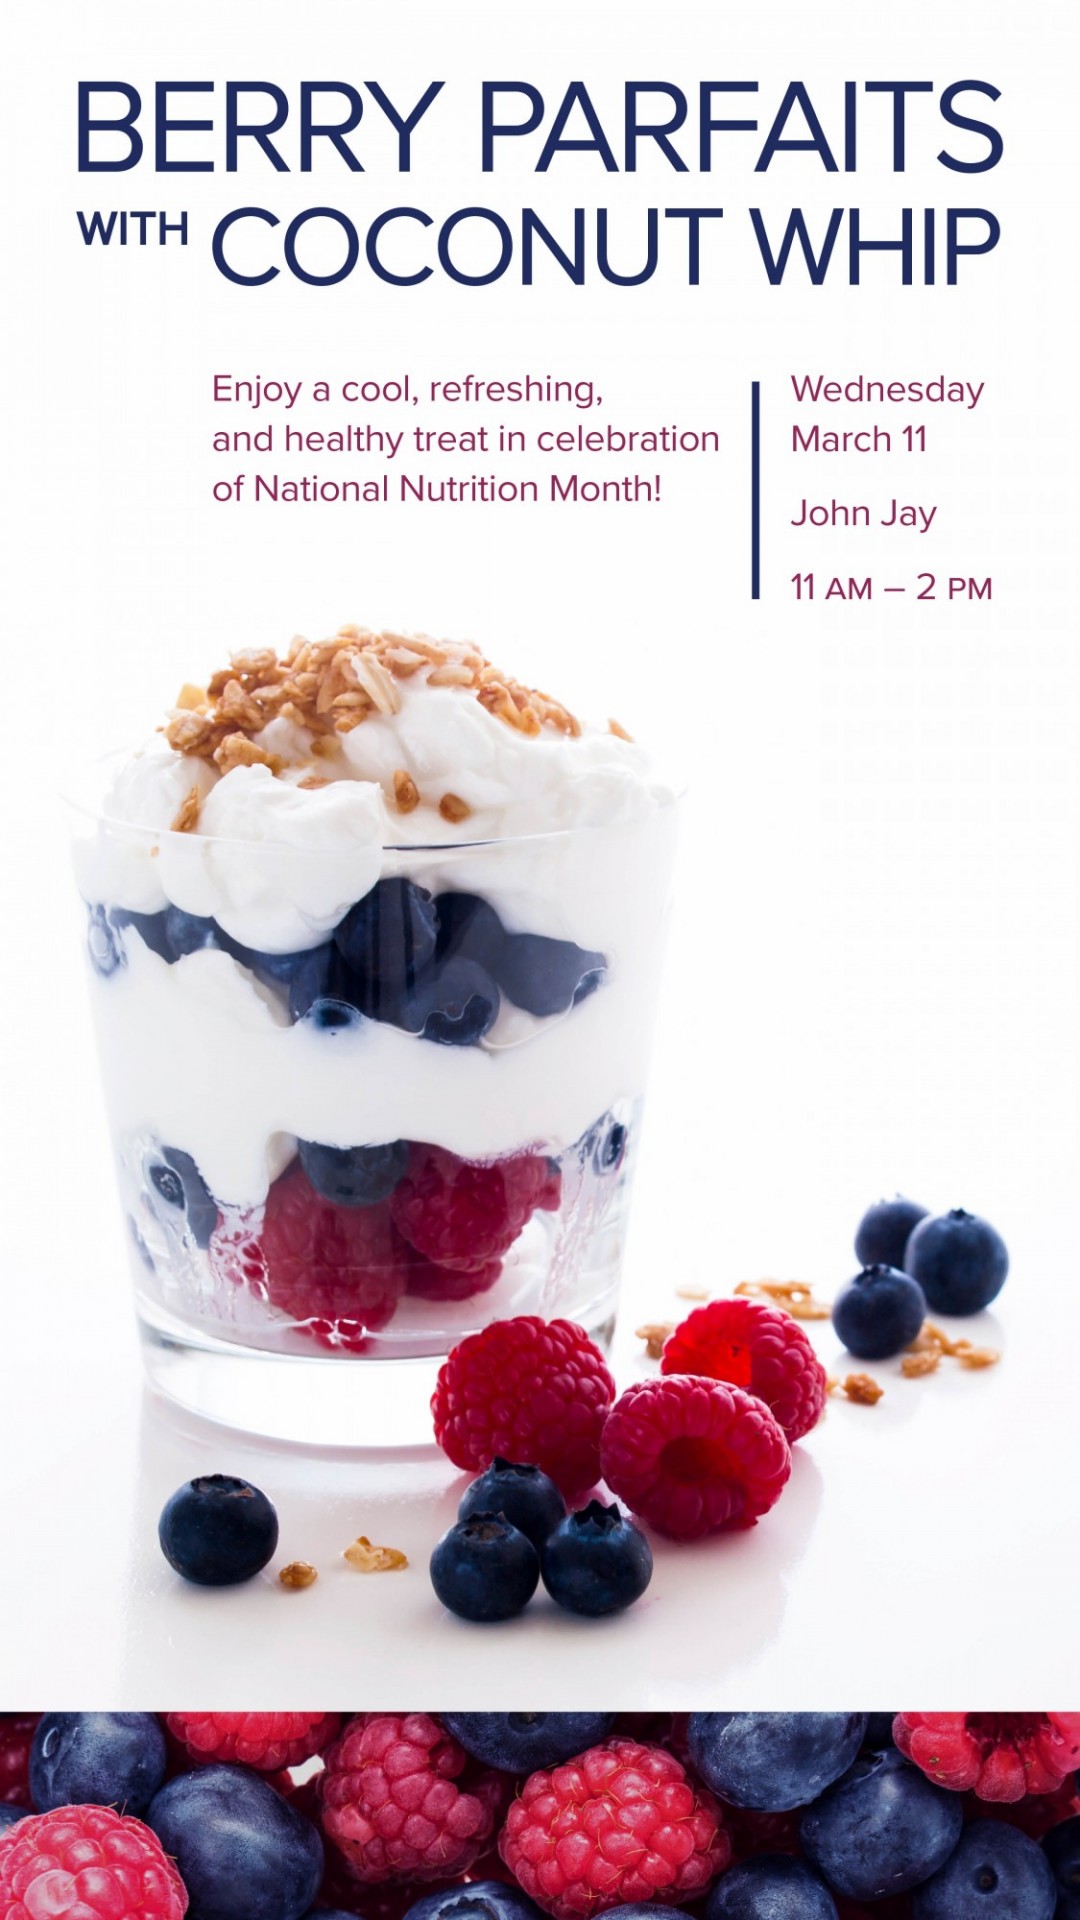 Enjoy a cool, refreshing, and healthy treat in celebration of National Nutrition Month!